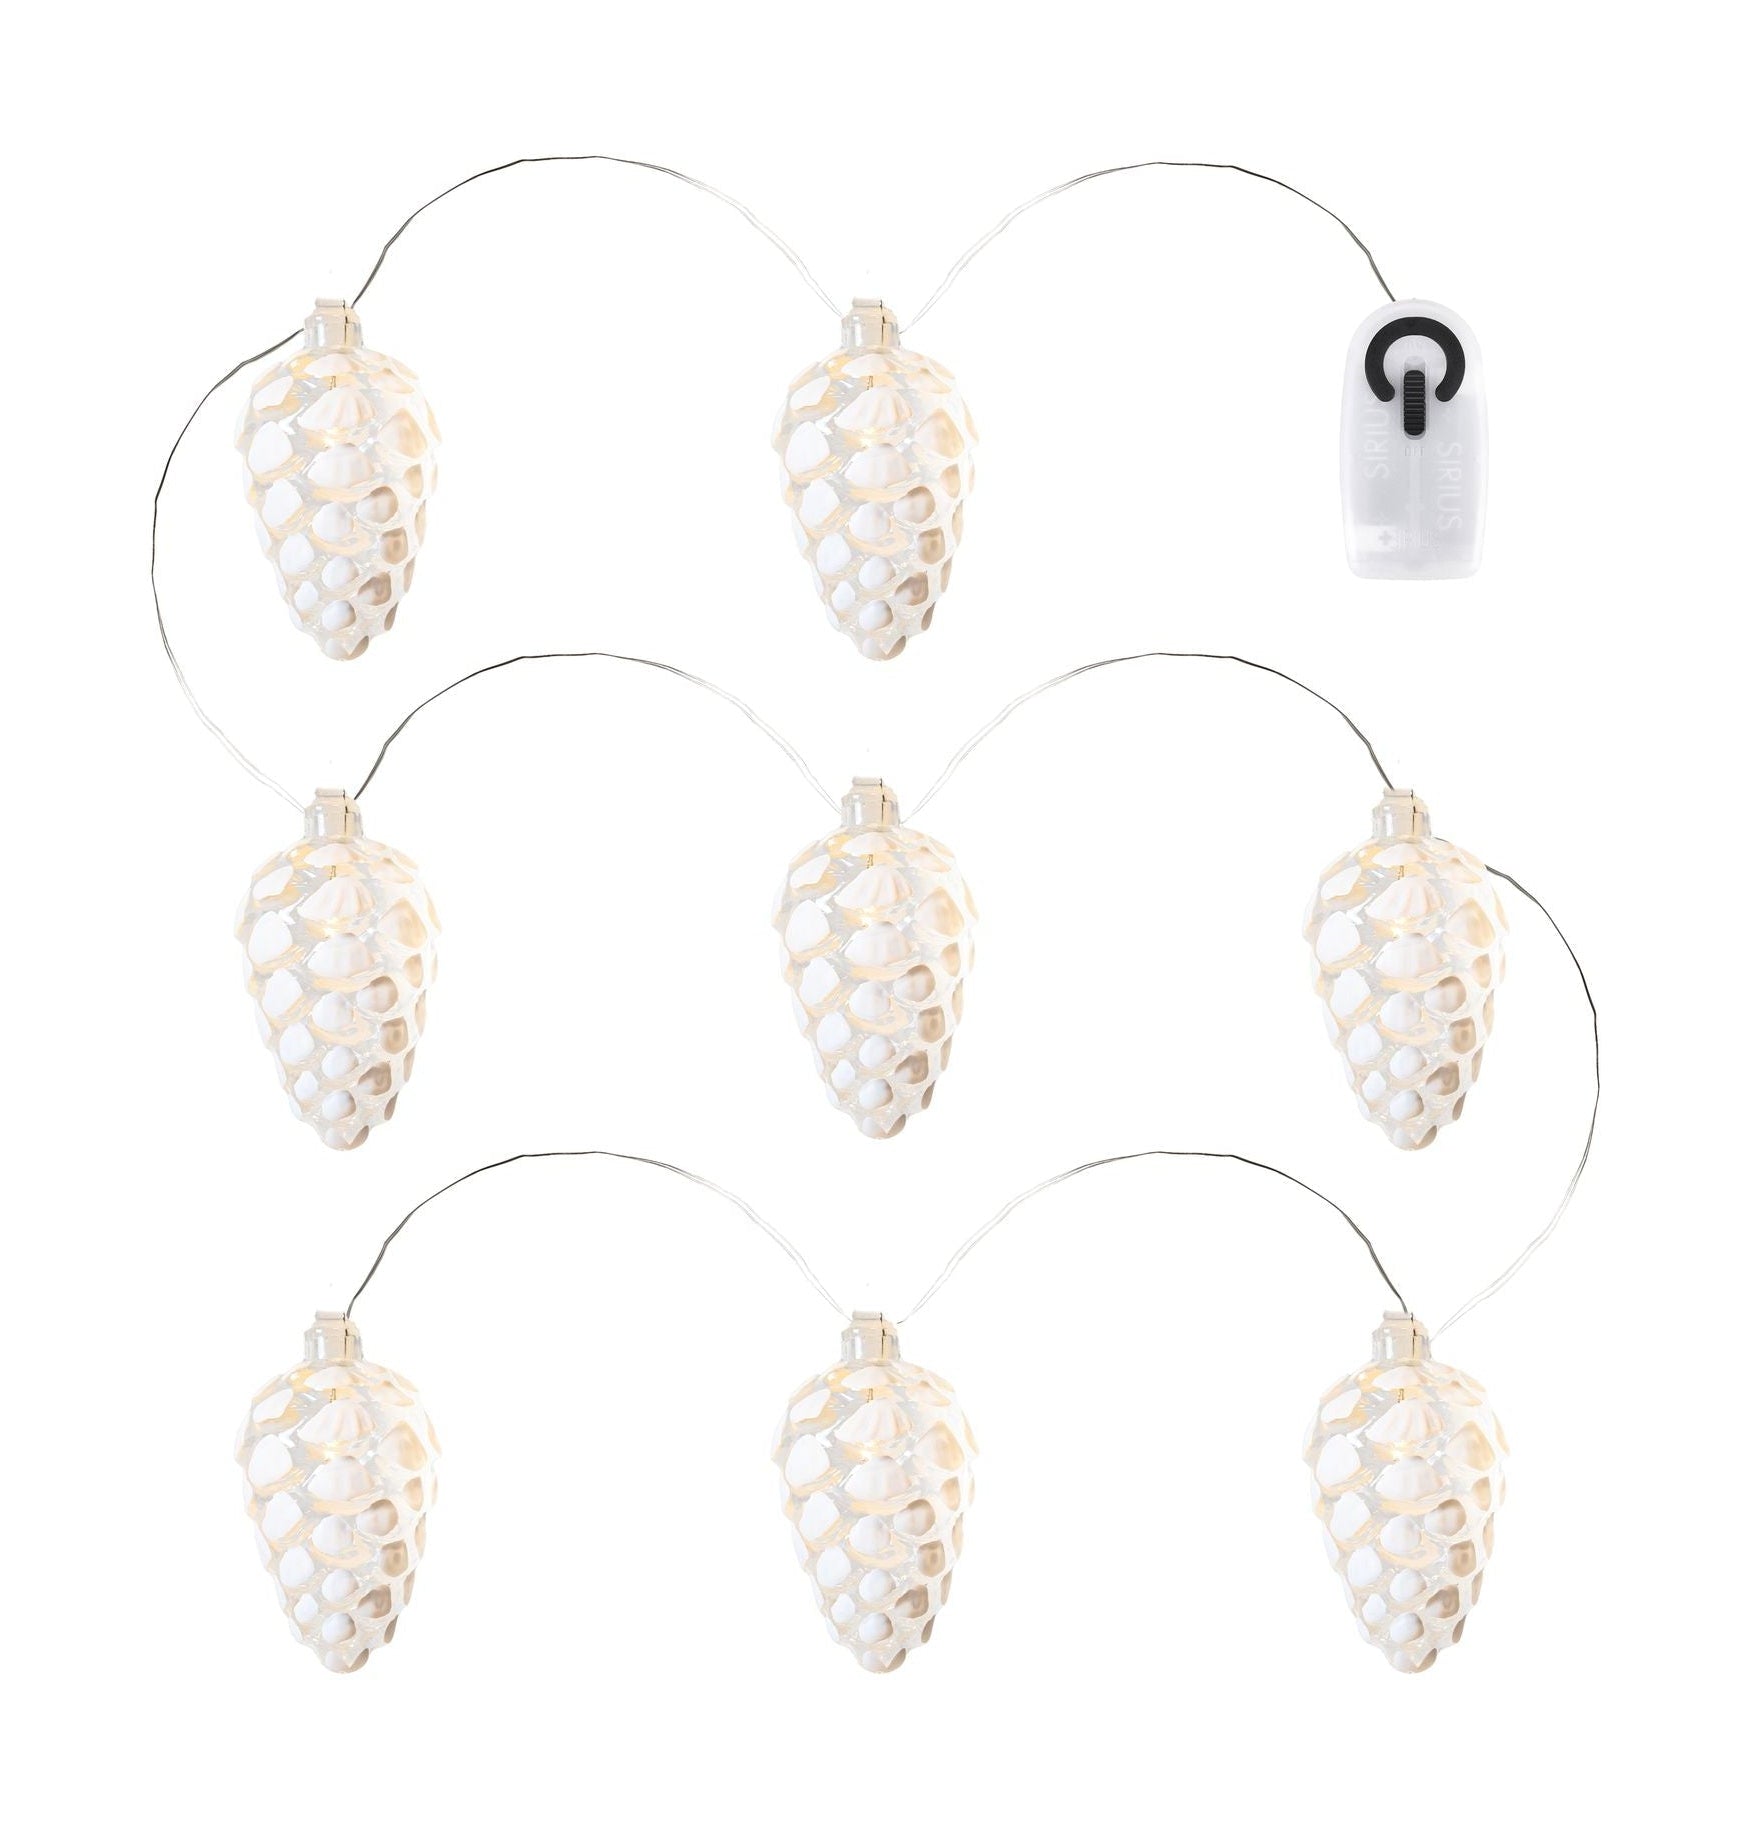 Sirius Celina Cone Garland 8 Le DS, wit